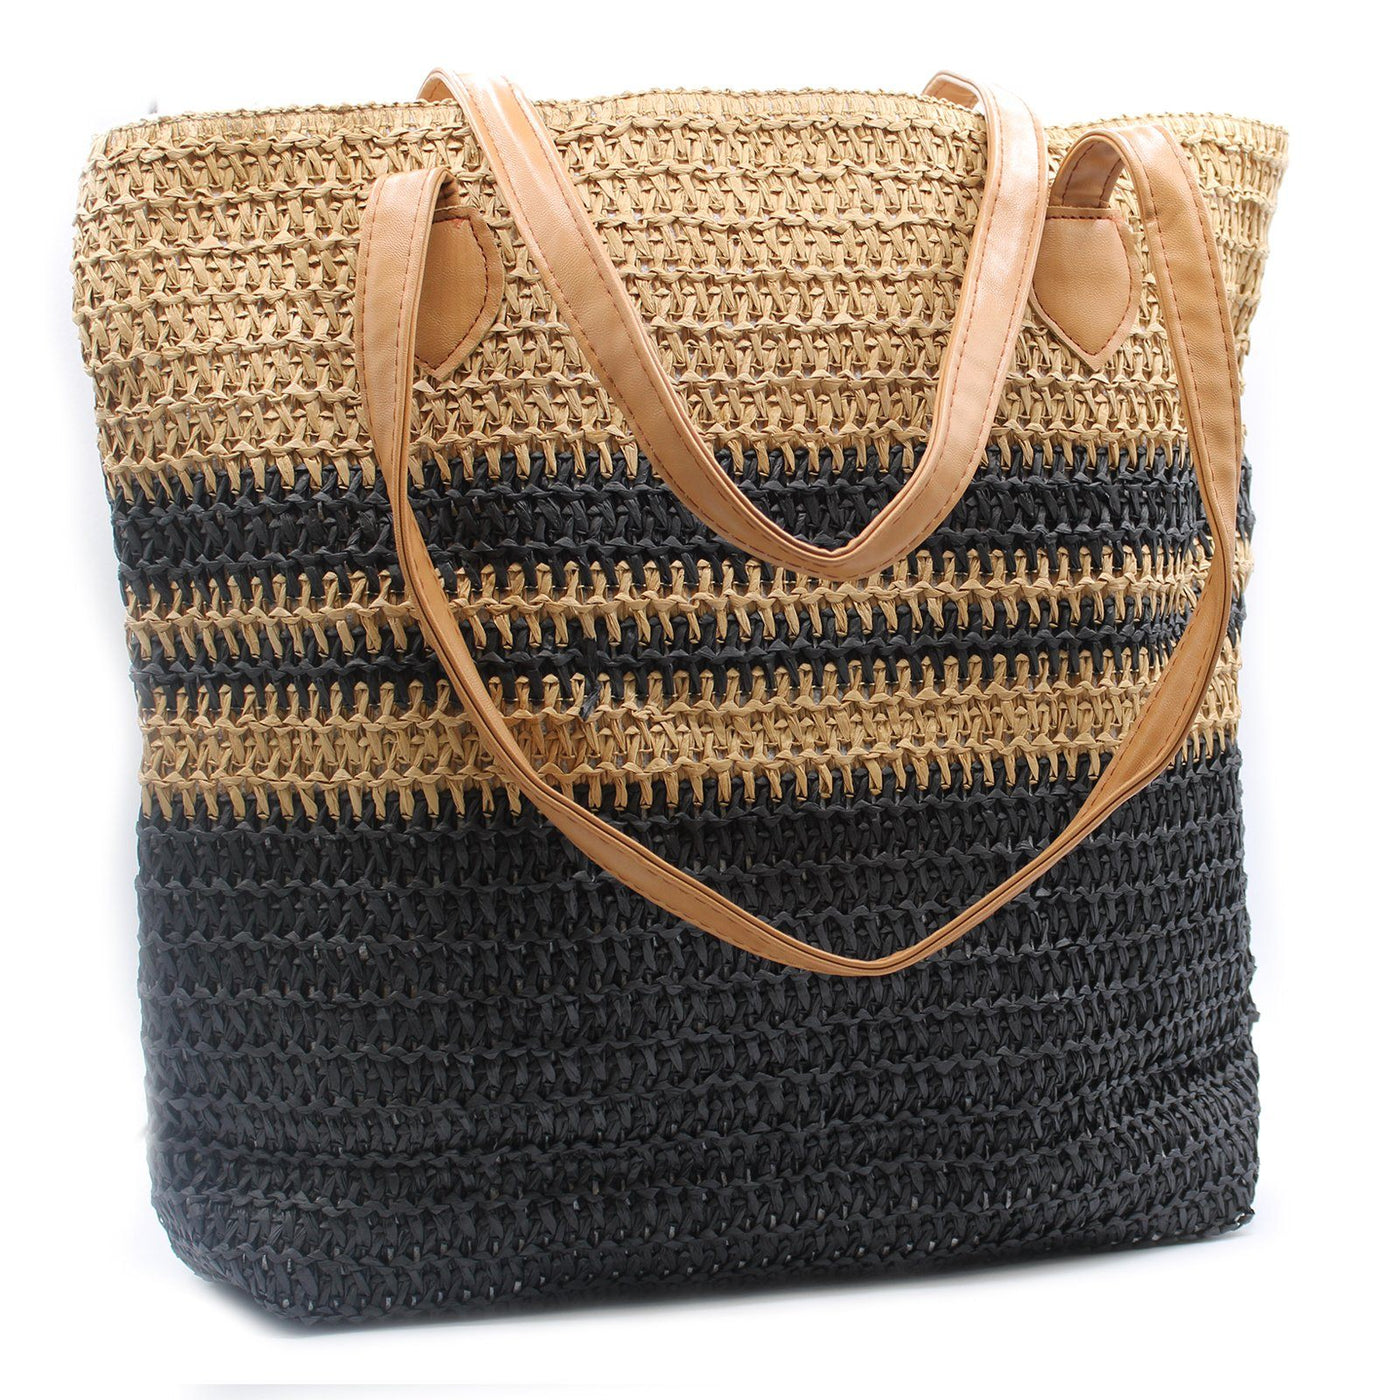 Back To The Bazaar Large Black And Tan Women's Shopper Bag.